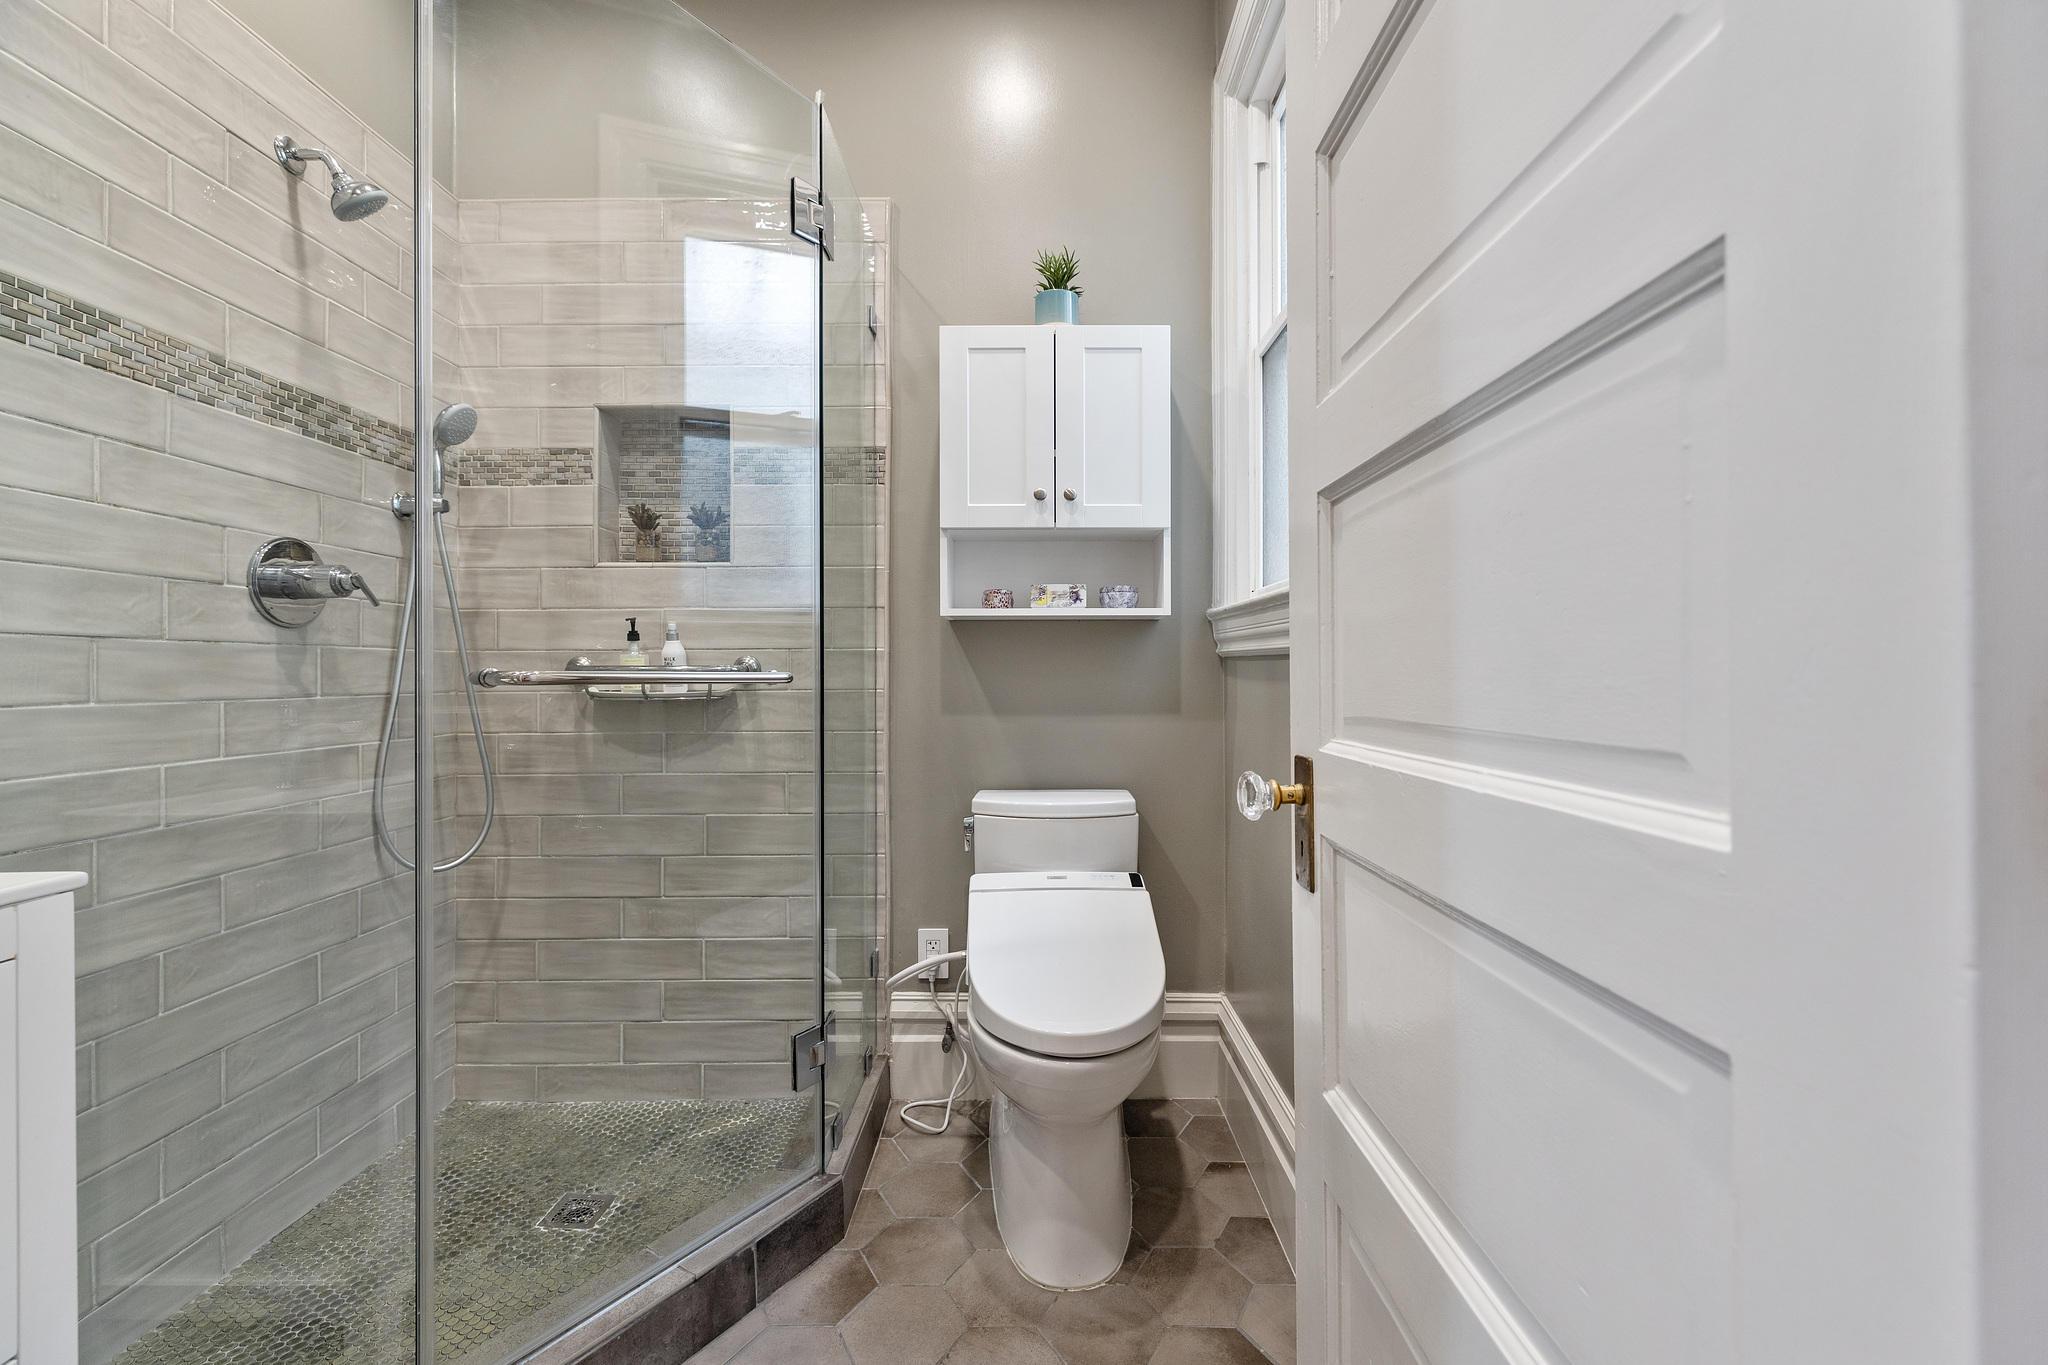 Property Photo: A glass shower and entry-way to a bathroom